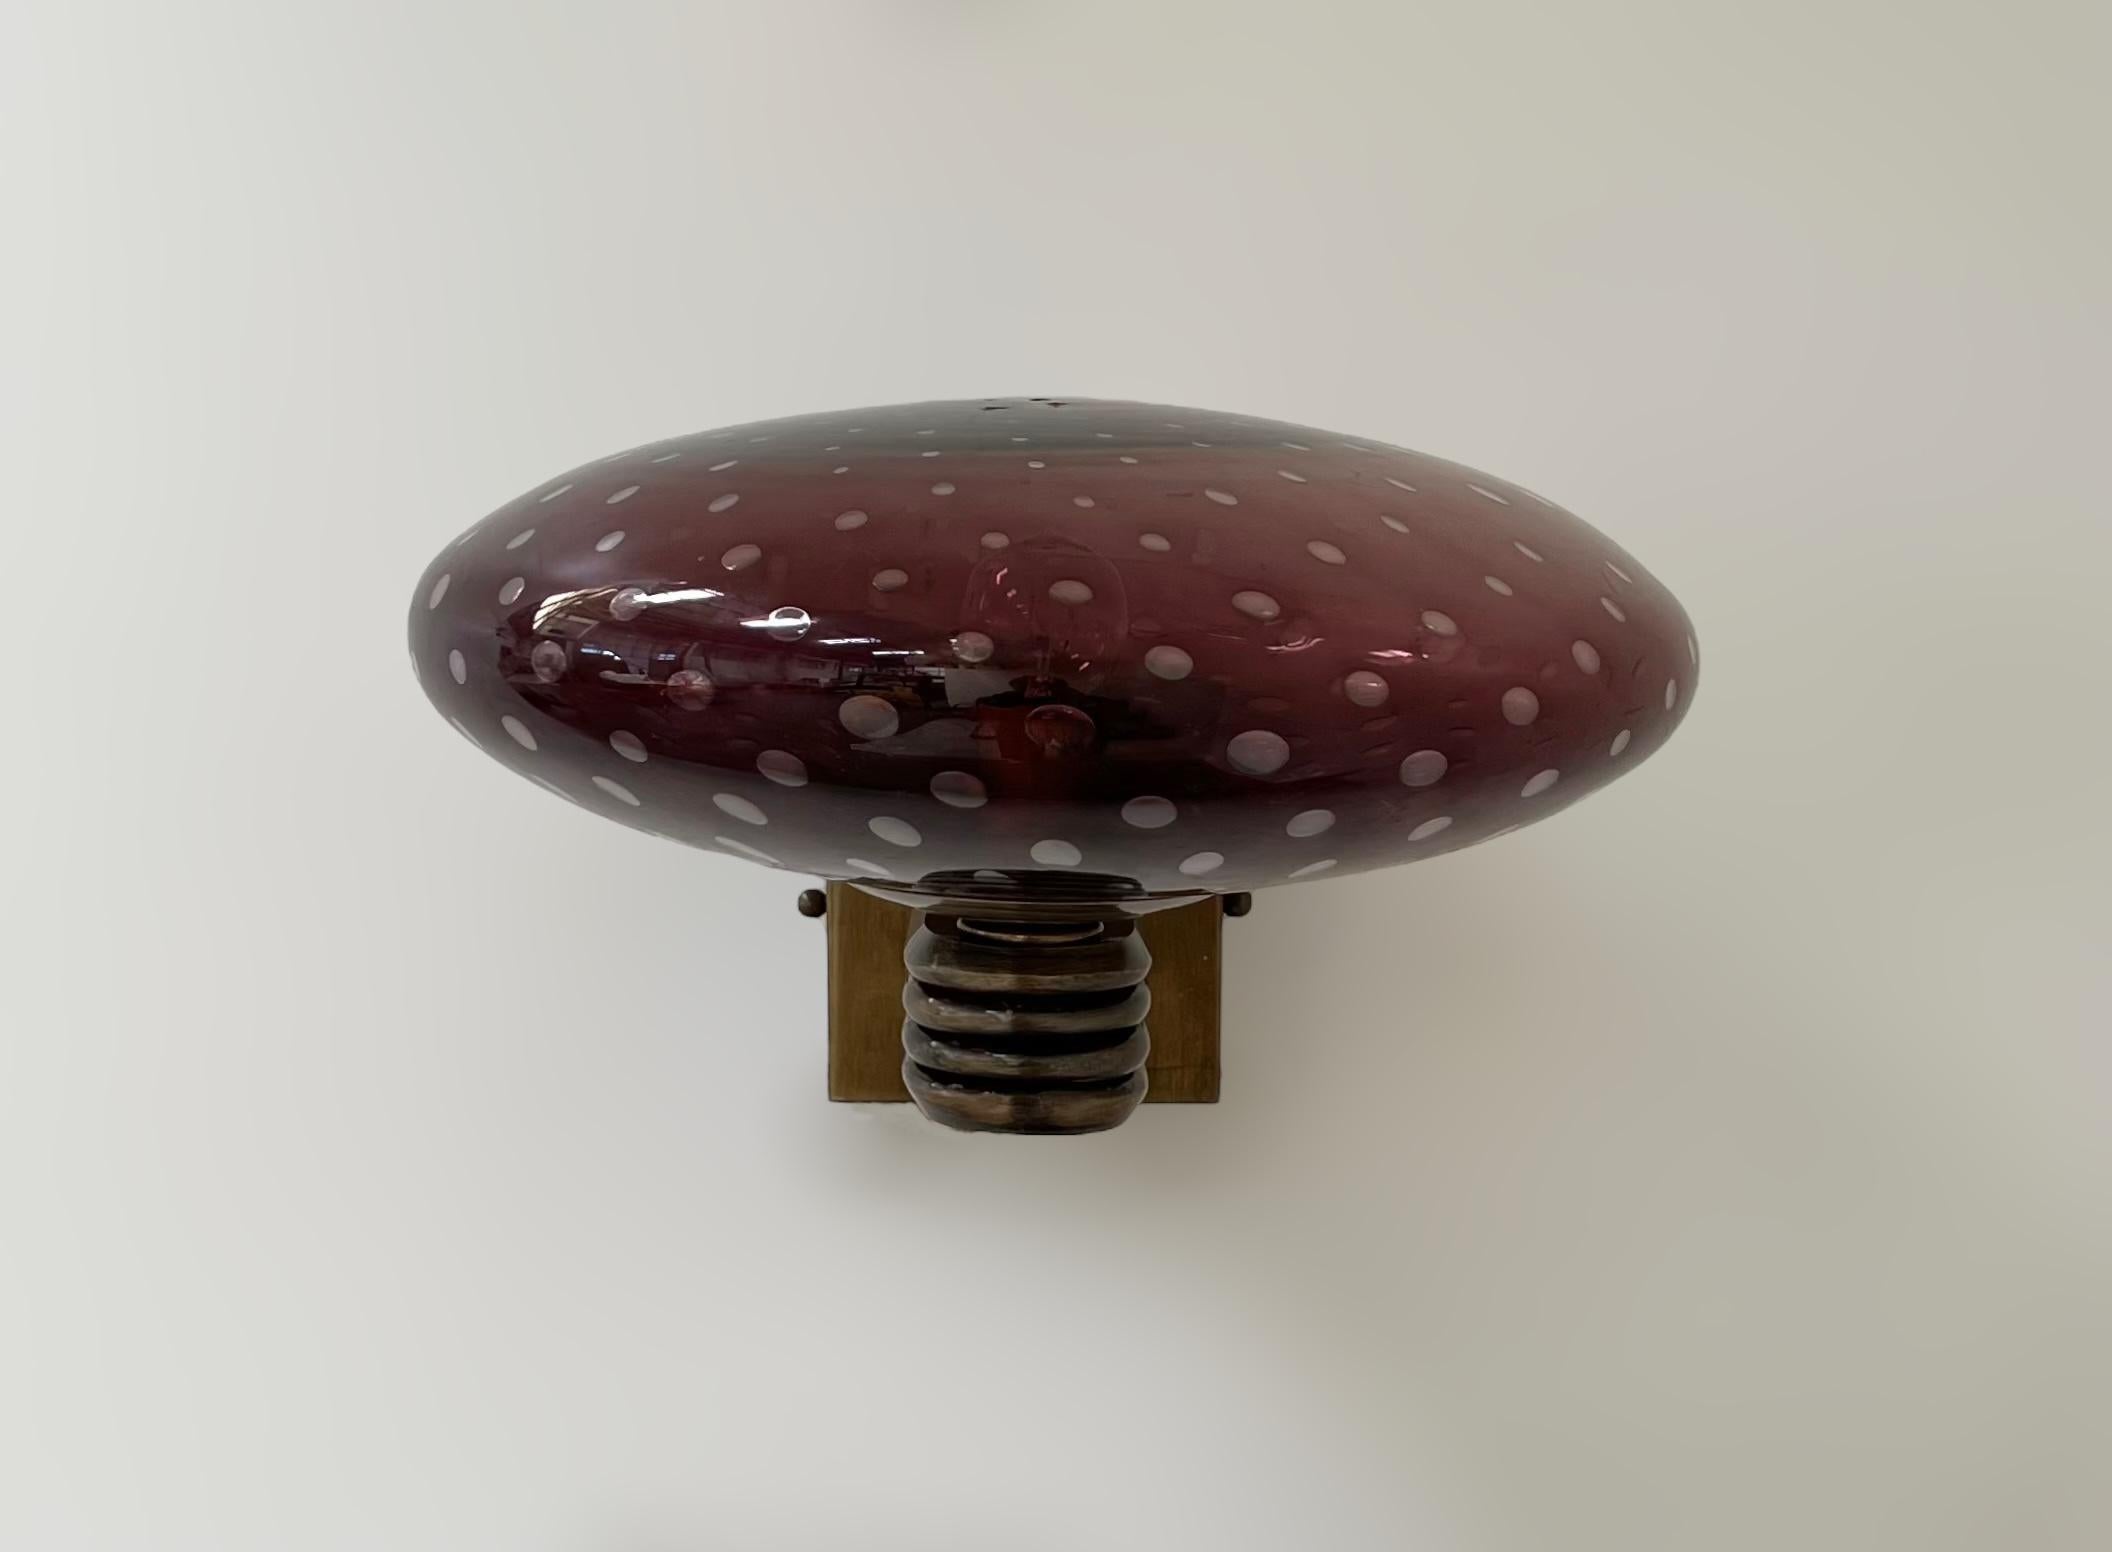 Italian Art Deco style wall light with amethyst Murano glass shade hand blown with bubbles inside the glass using Bollicine technique, mounted on bronzed finish frame / designed by Fabio Bergomi for Fabio Ltd, made in Italy
1 light / E12 or E14 type